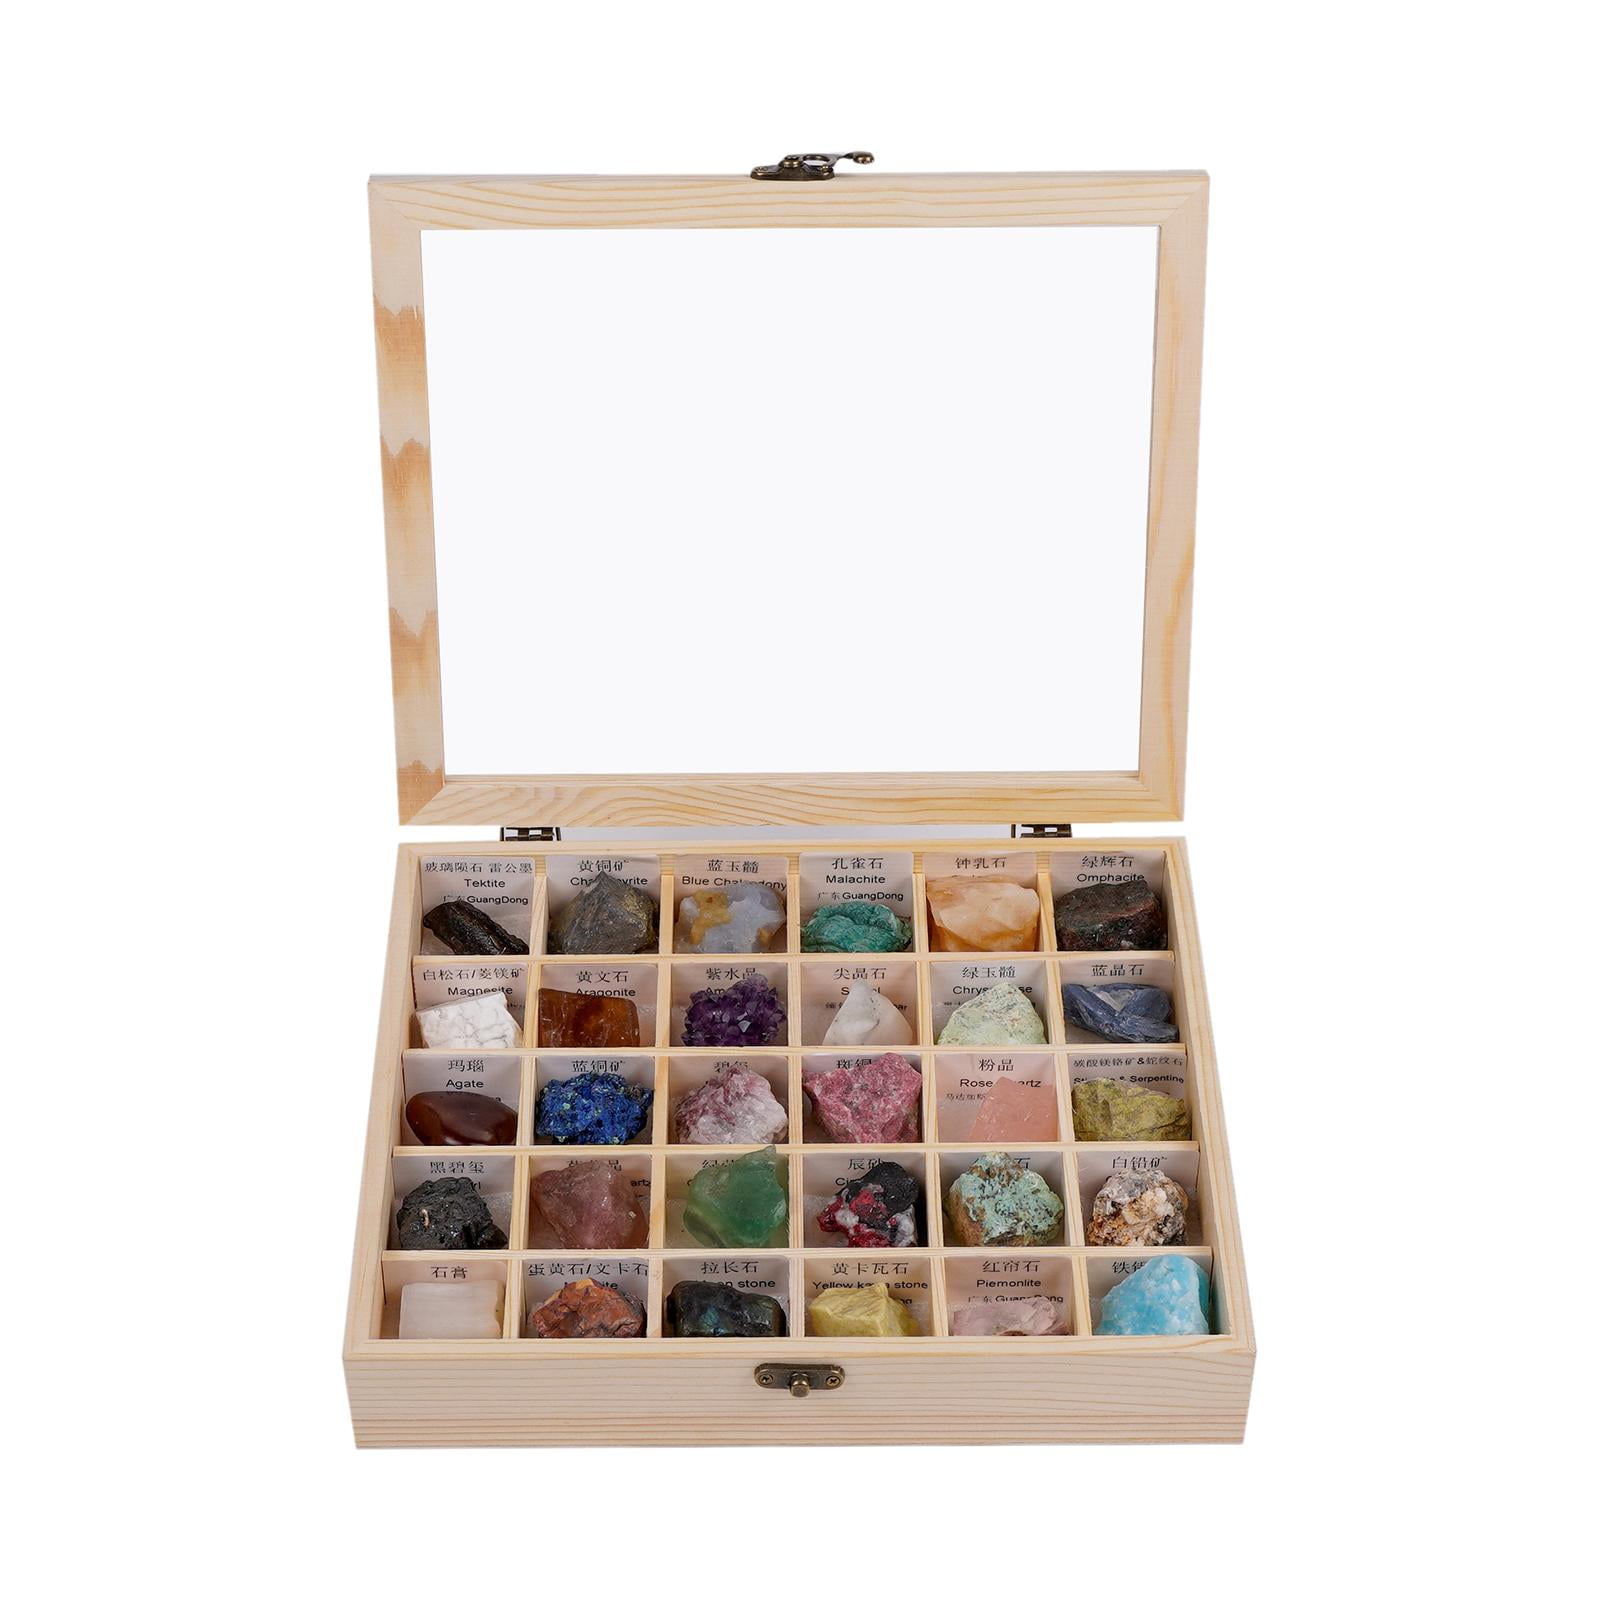 Transparent Dustproof Display Case for Rock & Mineral Collection Kids Gifts 